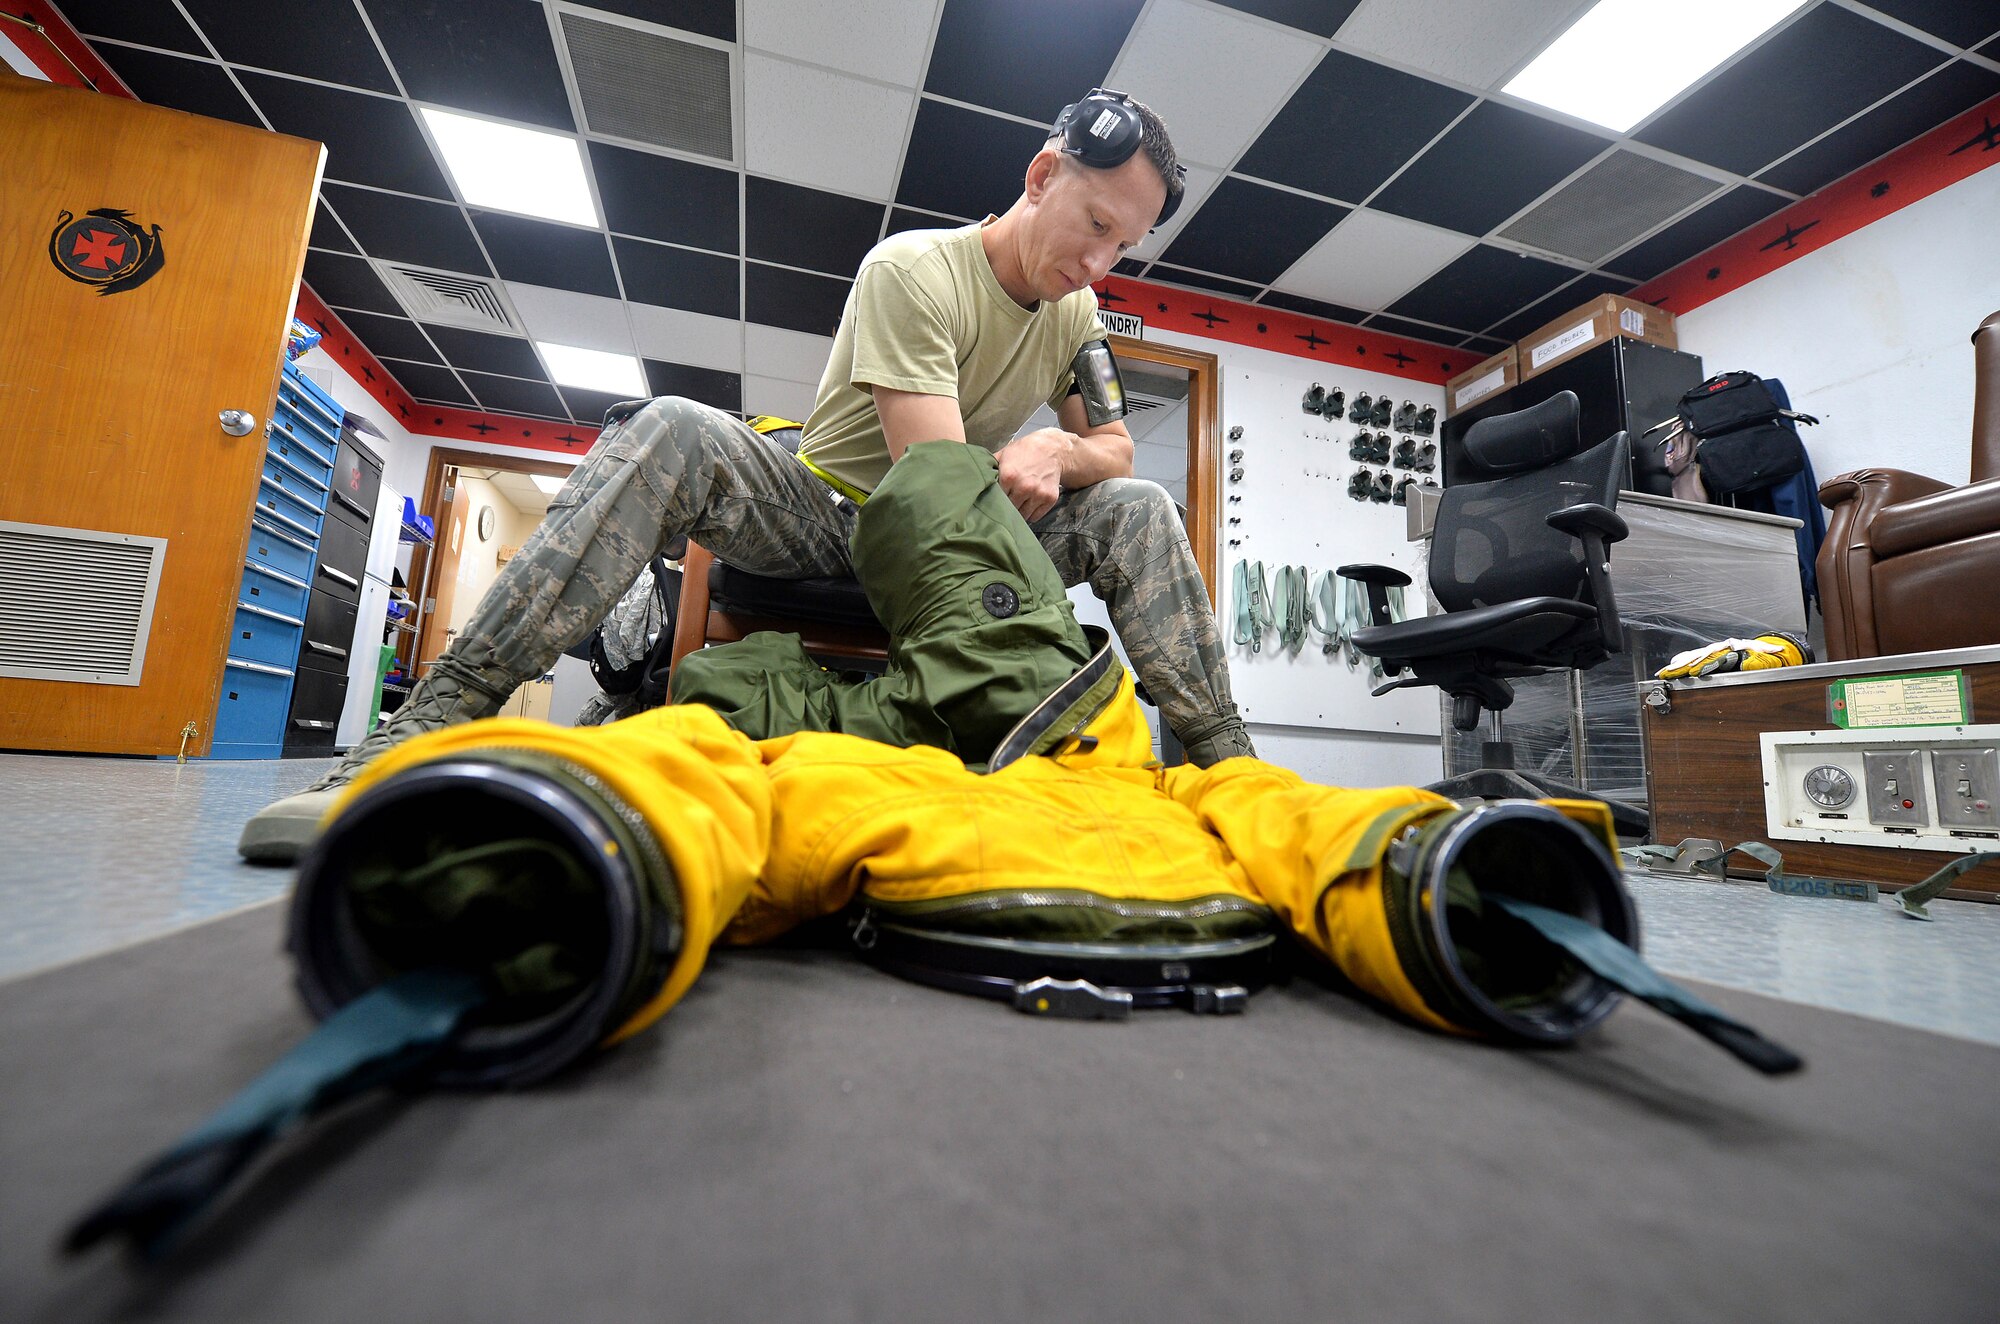 Master Sgt. Jeremy, Expeditionary Reconnaissance Squadron physiology support supervisor, prepares a U-2 full pressure suit at an undisclosed location in Southwest Asia Aug. 7, 2015. The physiological support detachment team is responsible for maintaining the U-2 full pressure suit, ensuring it functions properly and assisting pilots with donning the gear. (U.S. Air Force photo/Tech. Sgt. Jeff Andrejcik)